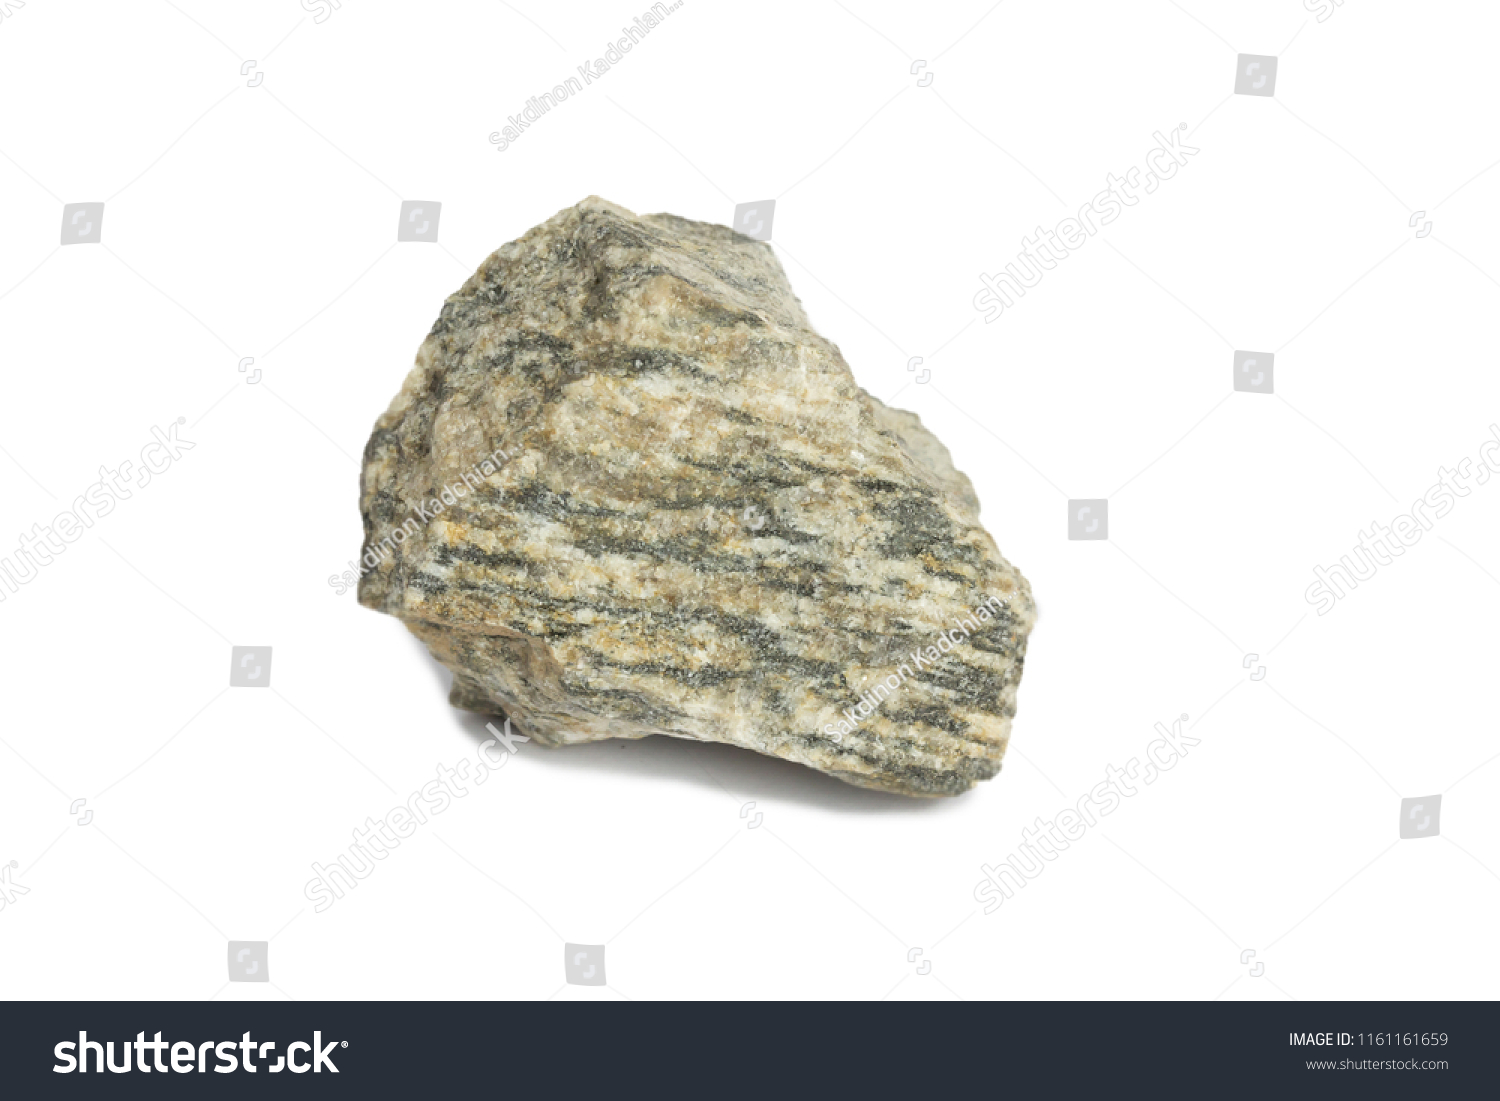 gneiss Rock isolate on white background
 #1161161659